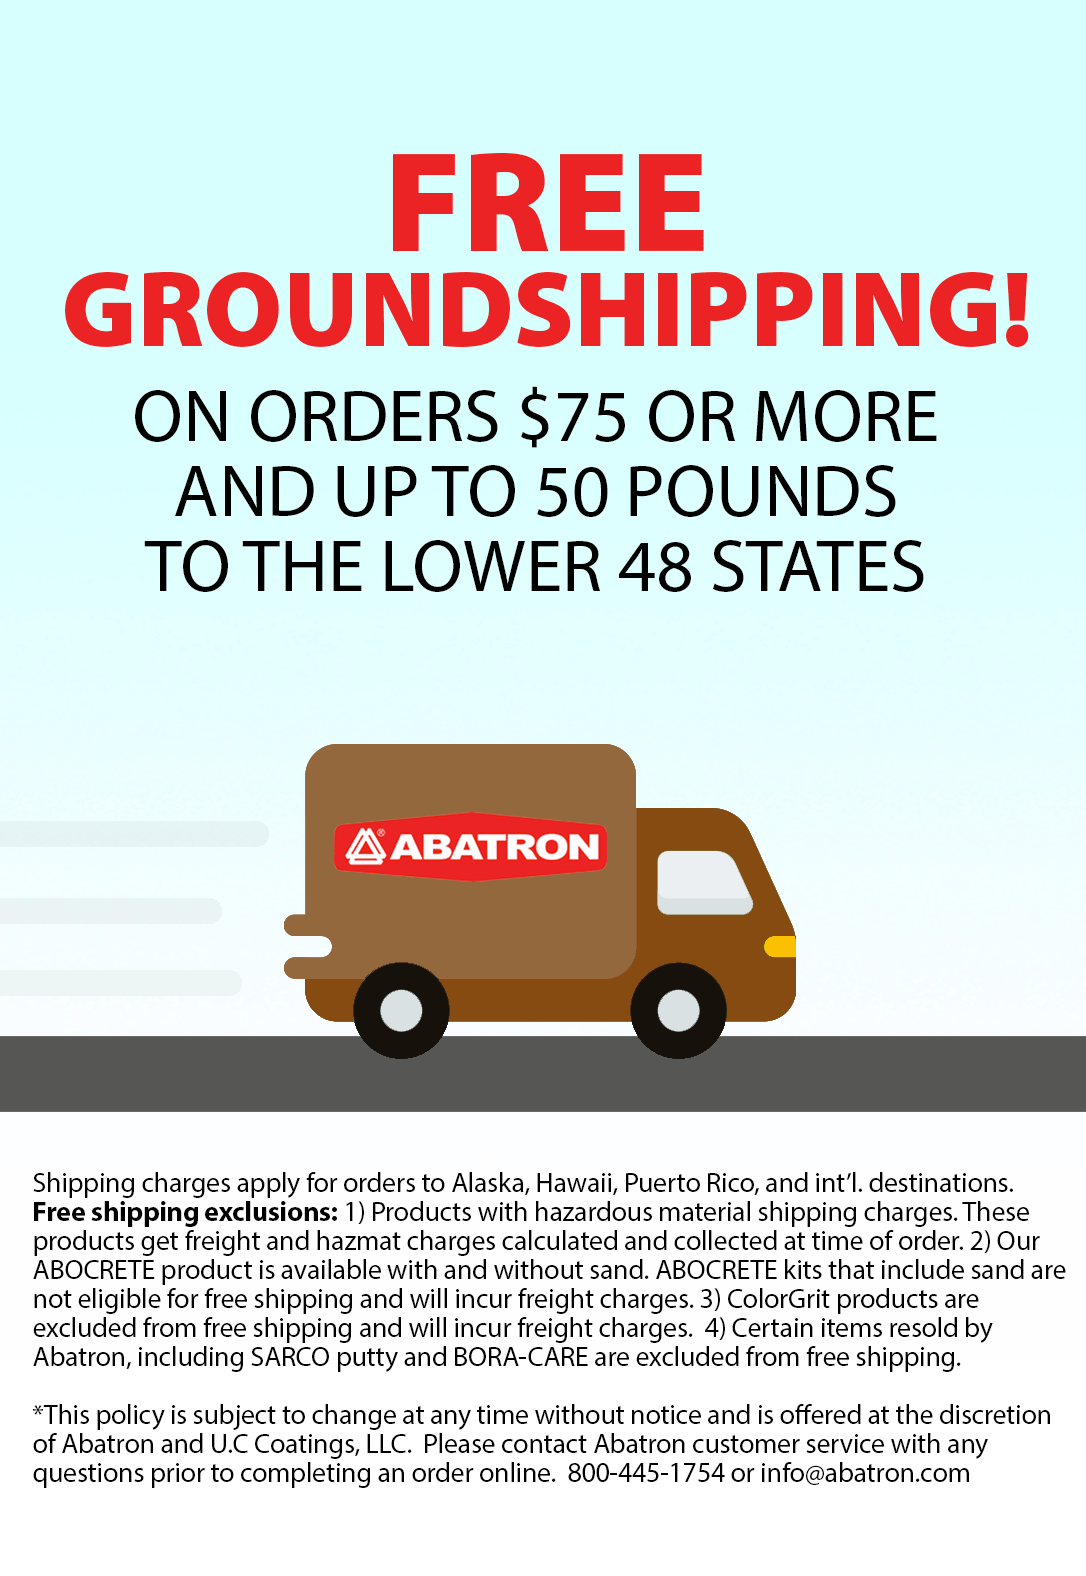 FREE GROUNDSHIPPING!